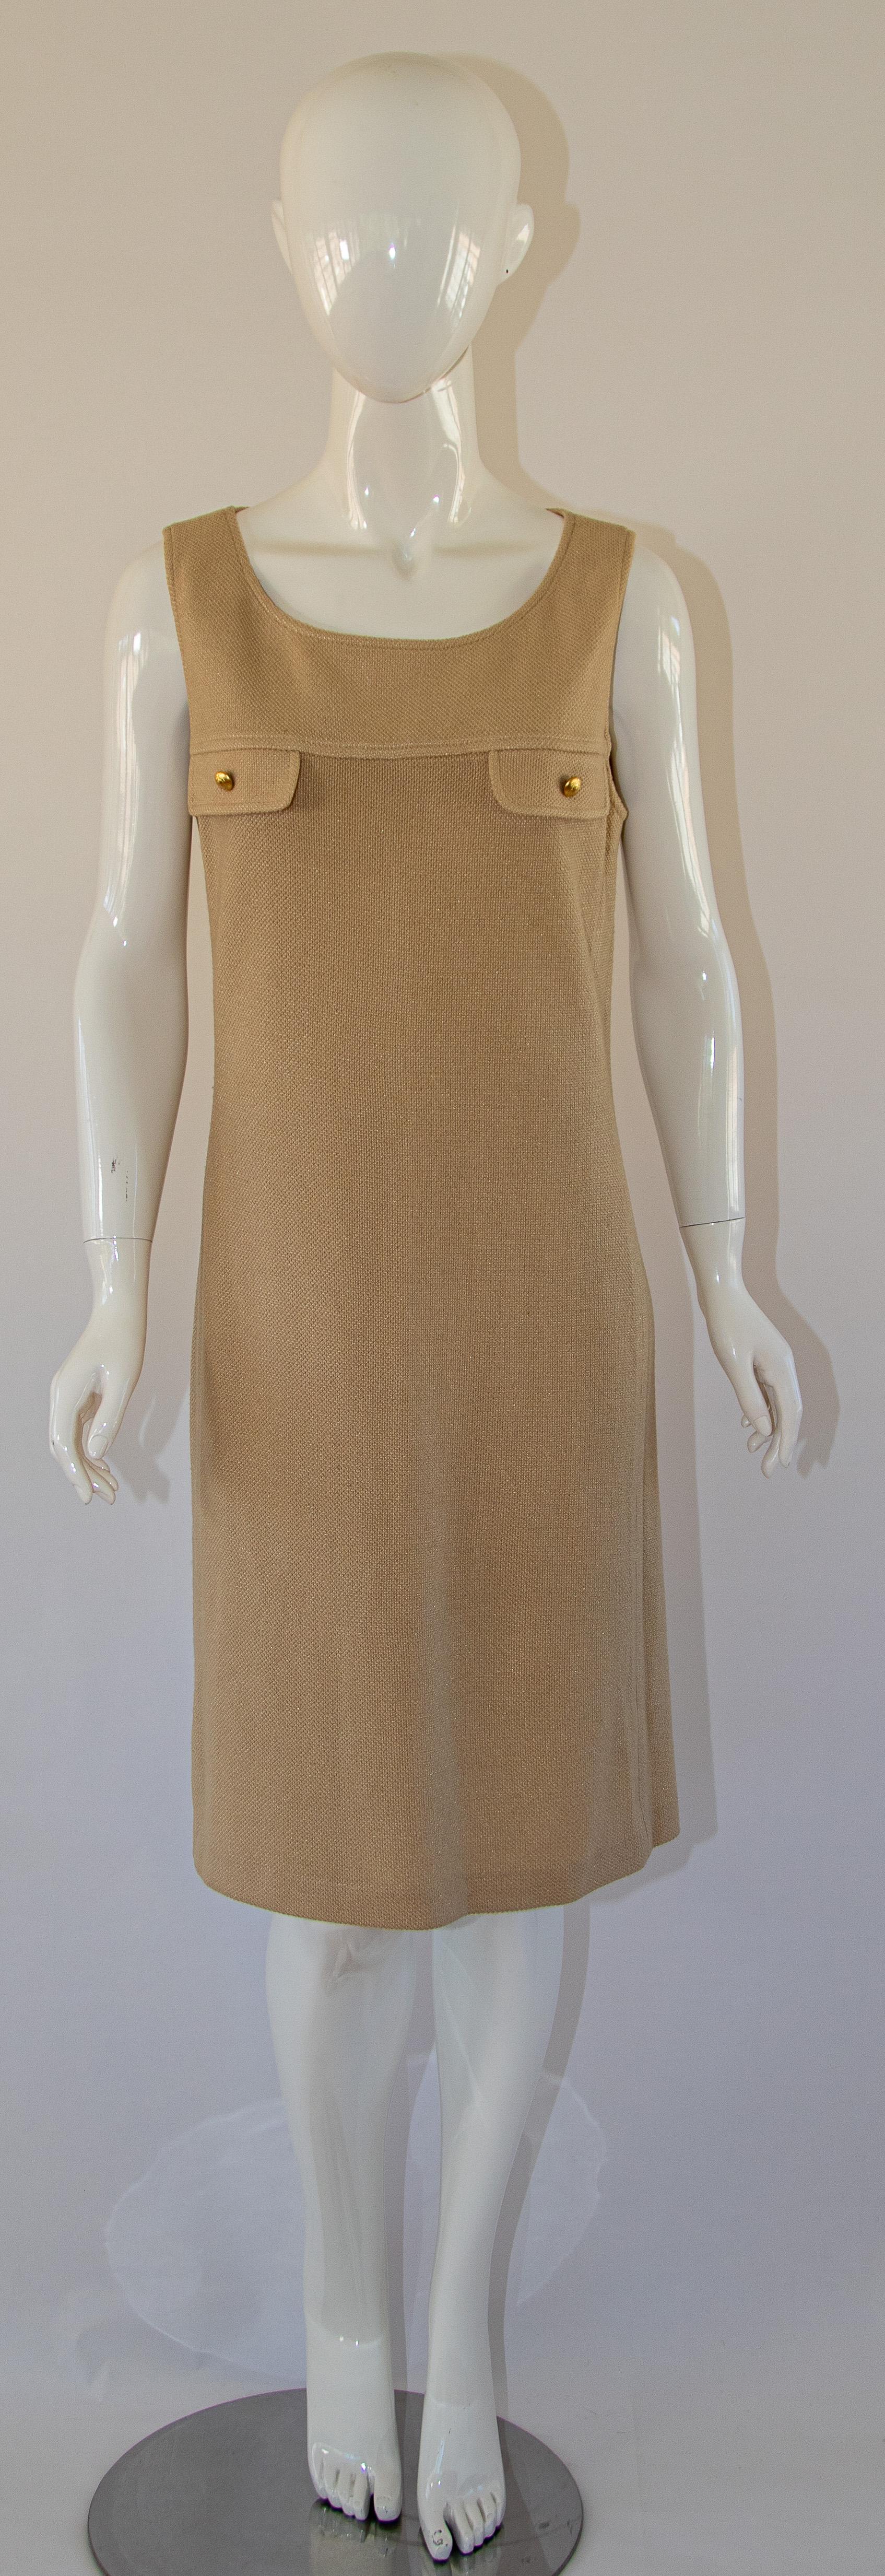 Vintage St John collection by Marie Gray Knit mini dress.
St John beige wool knit unlined sleeveless mini dress classic chic.
Two false patch pockets with gold buttons, zipper in back.
Size 8 US
Made in USA.
Measurements:
Bust-36